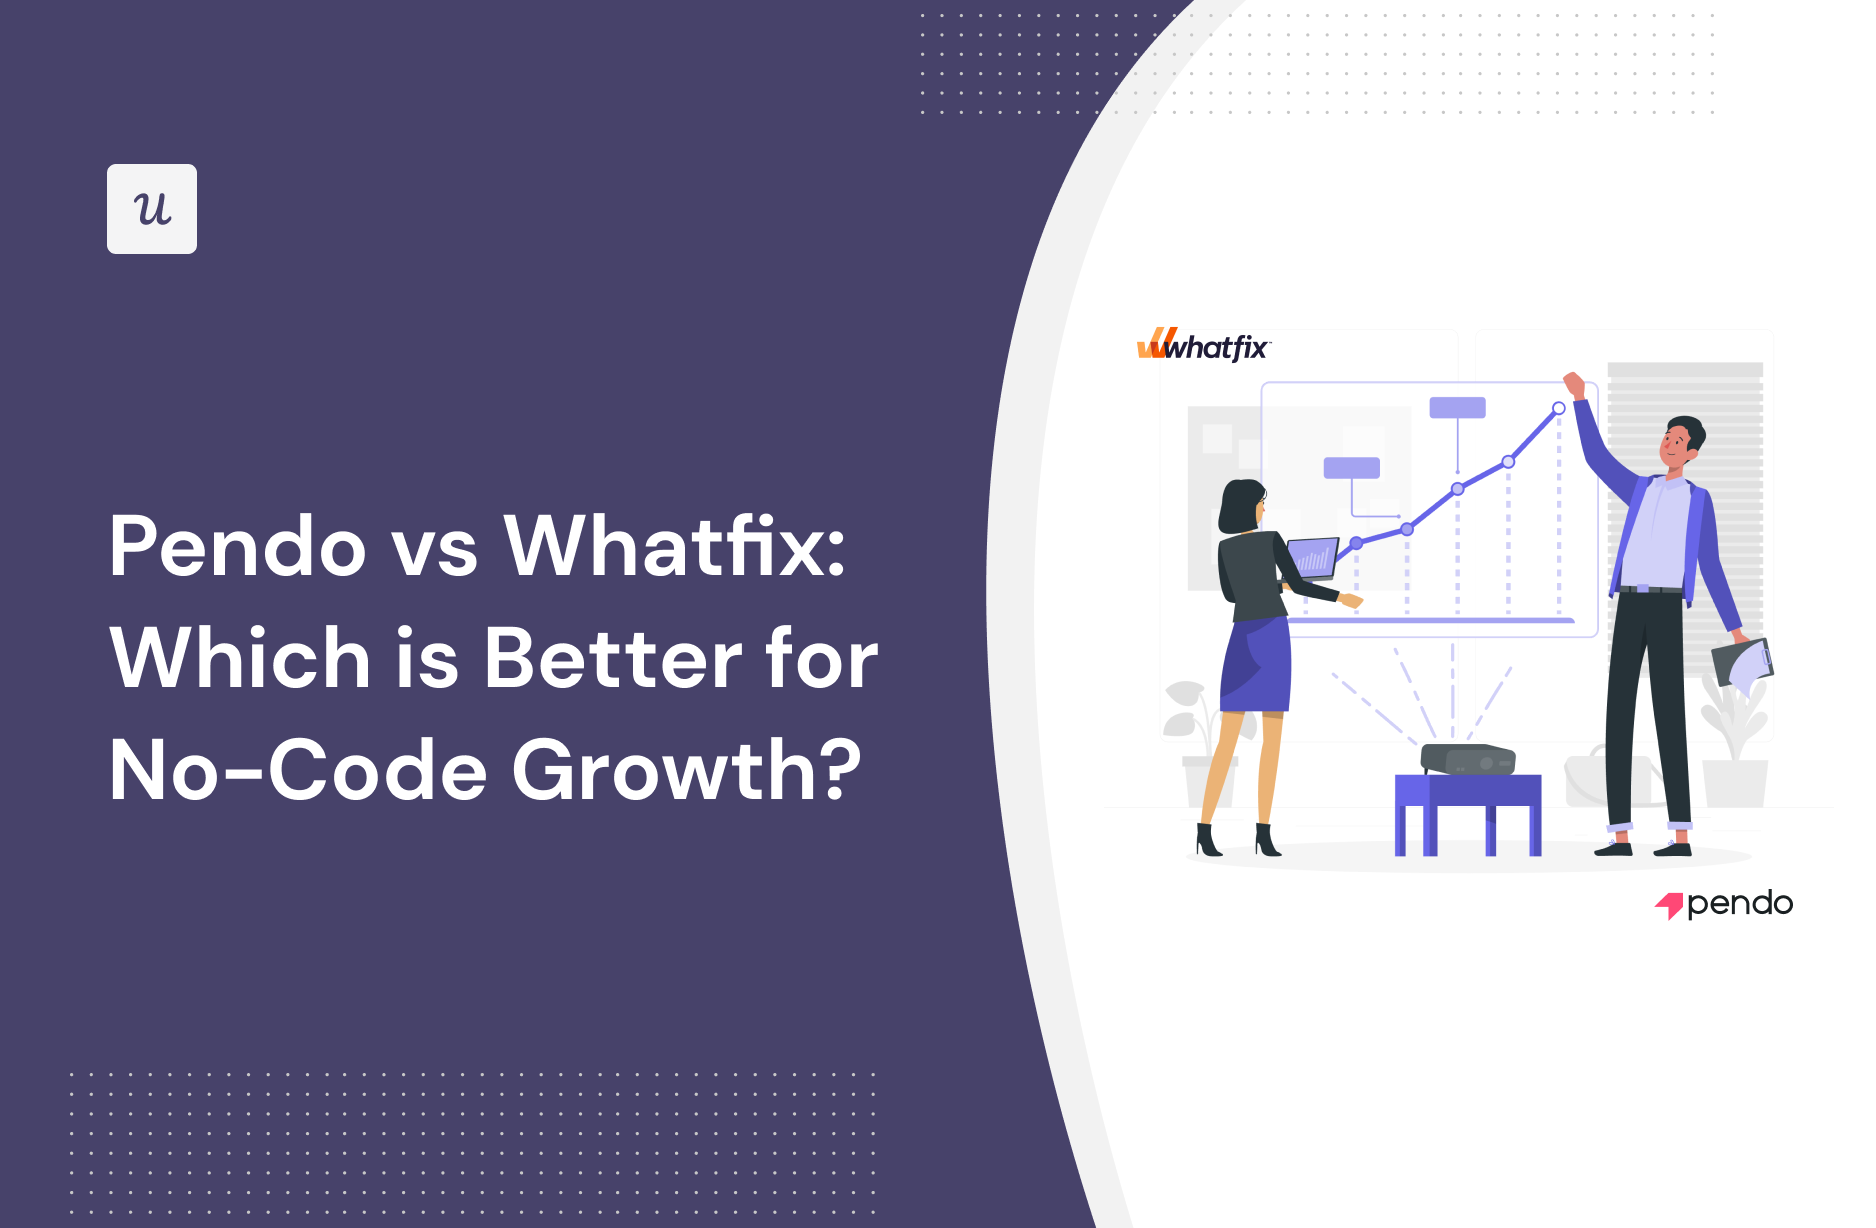 Pendo vs Whatfix: Which is Better for No-Code Growth?